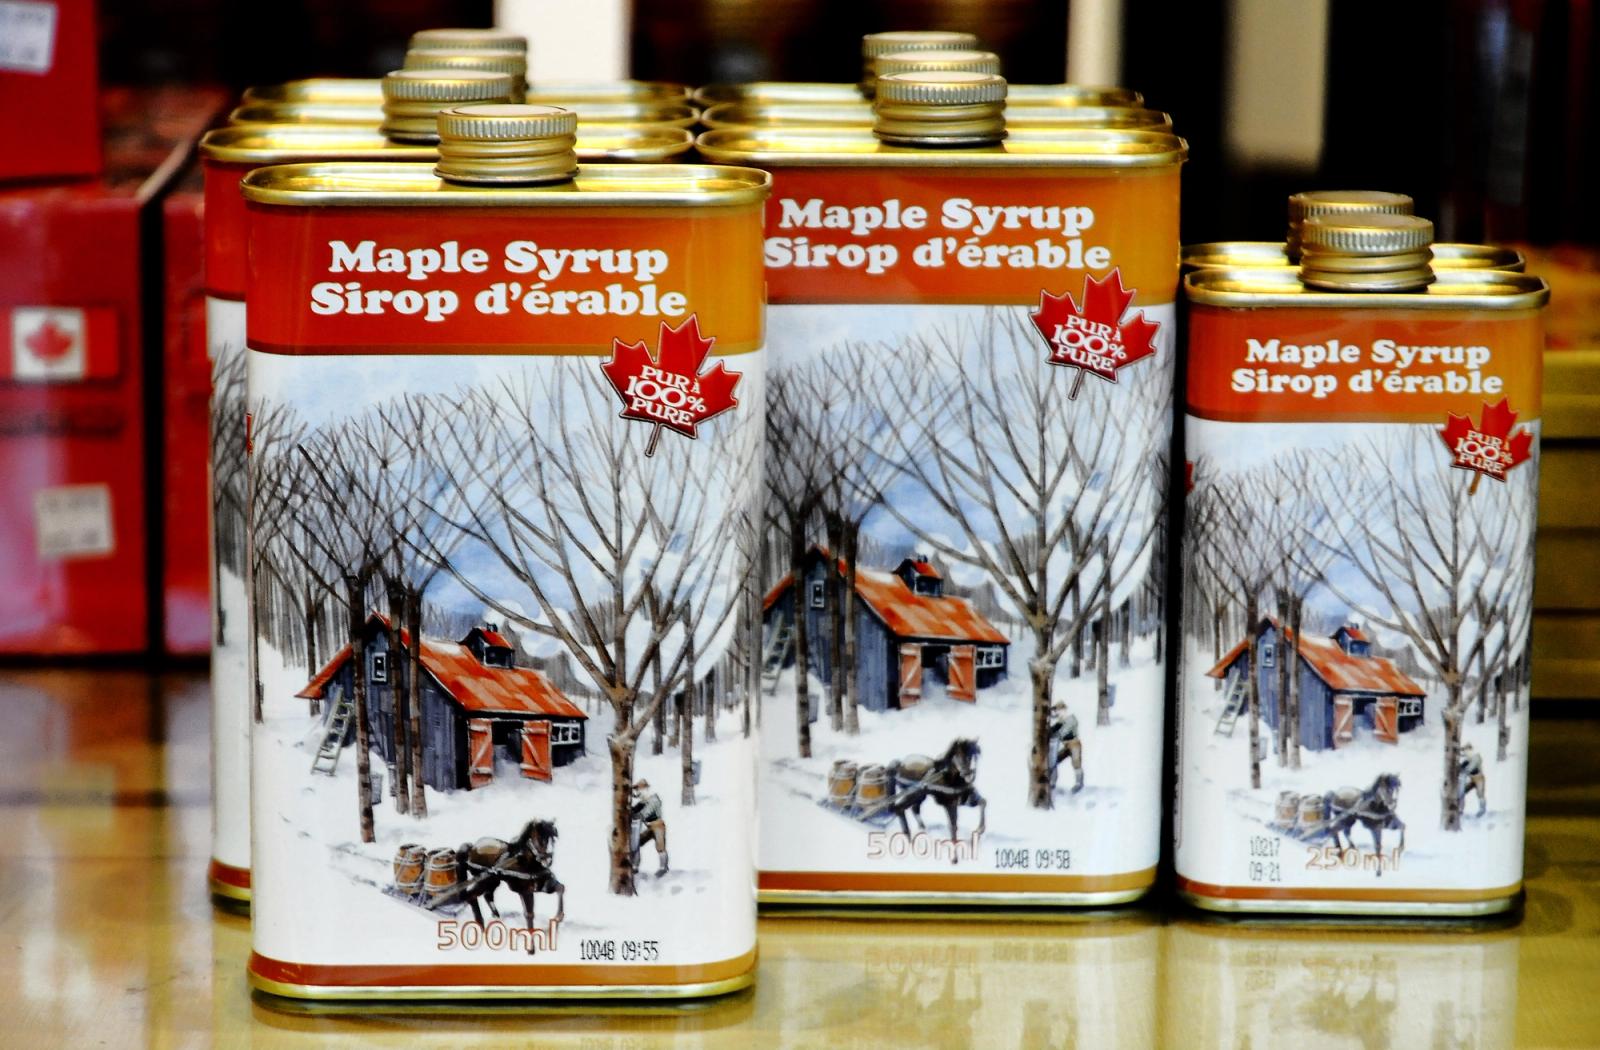 Maple syrup cans at Jean Lesage International Airport. Quebec, Canada